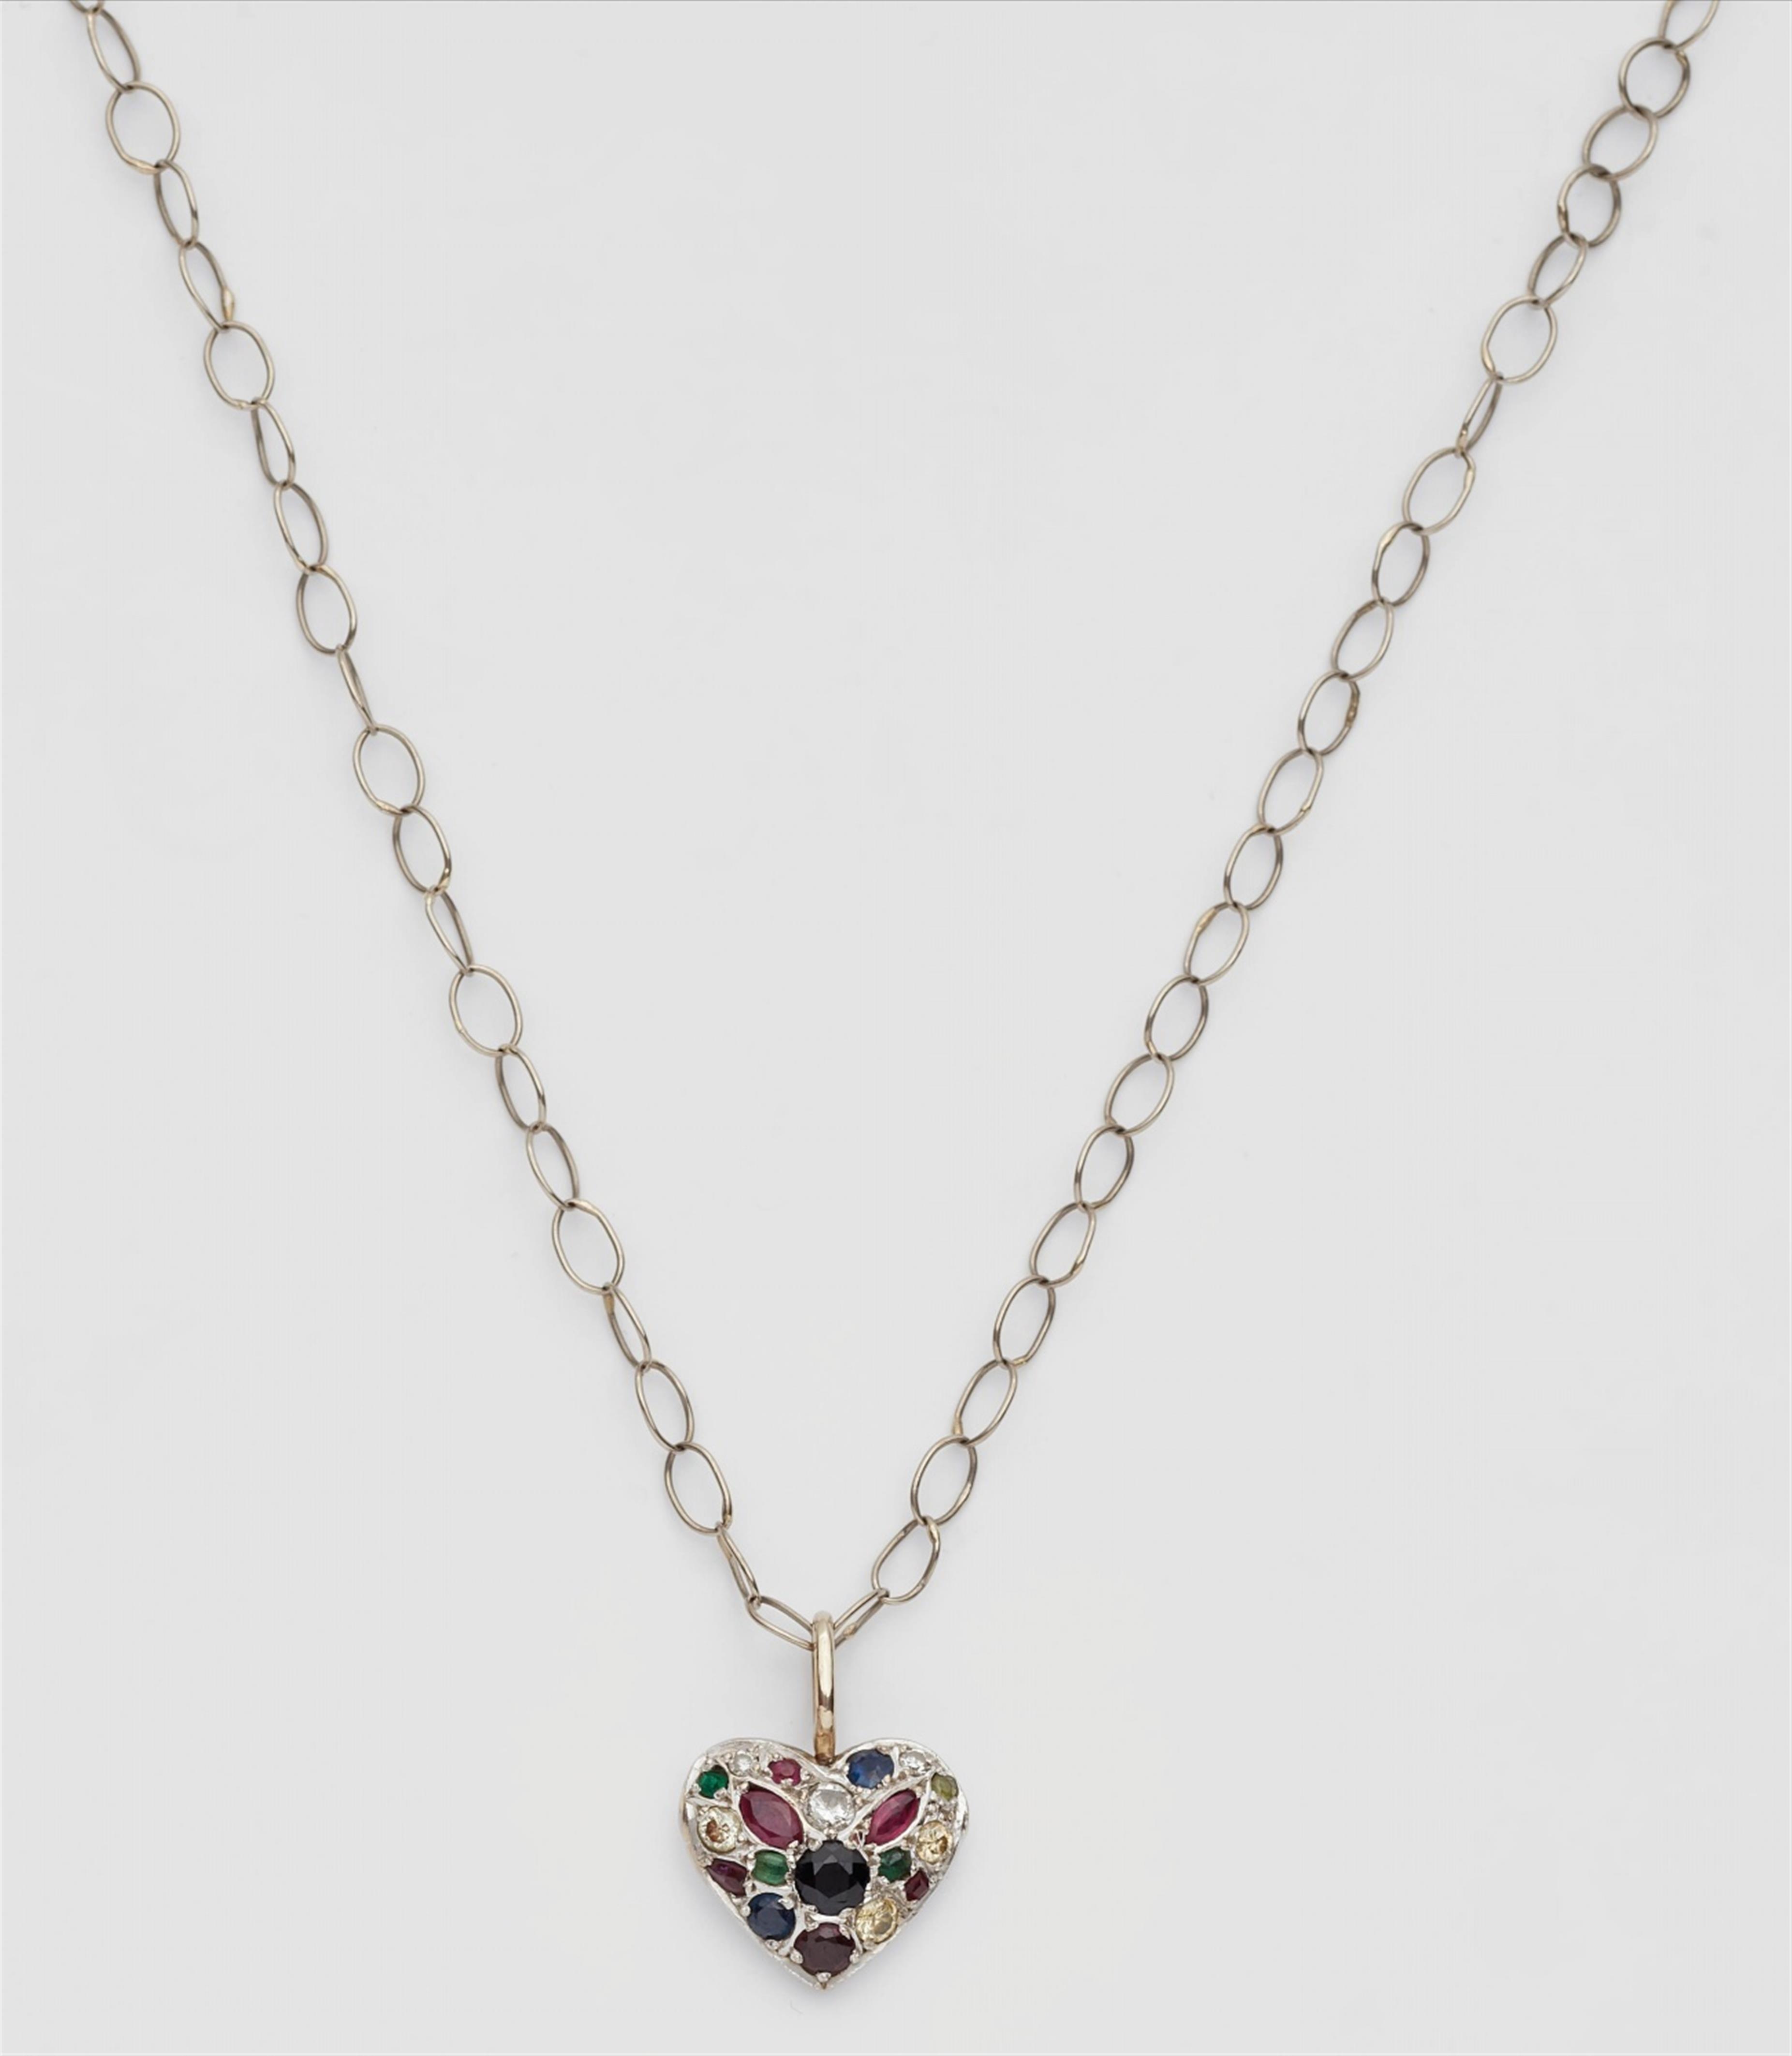 A necklace with a jewelled heart pendant - image-1